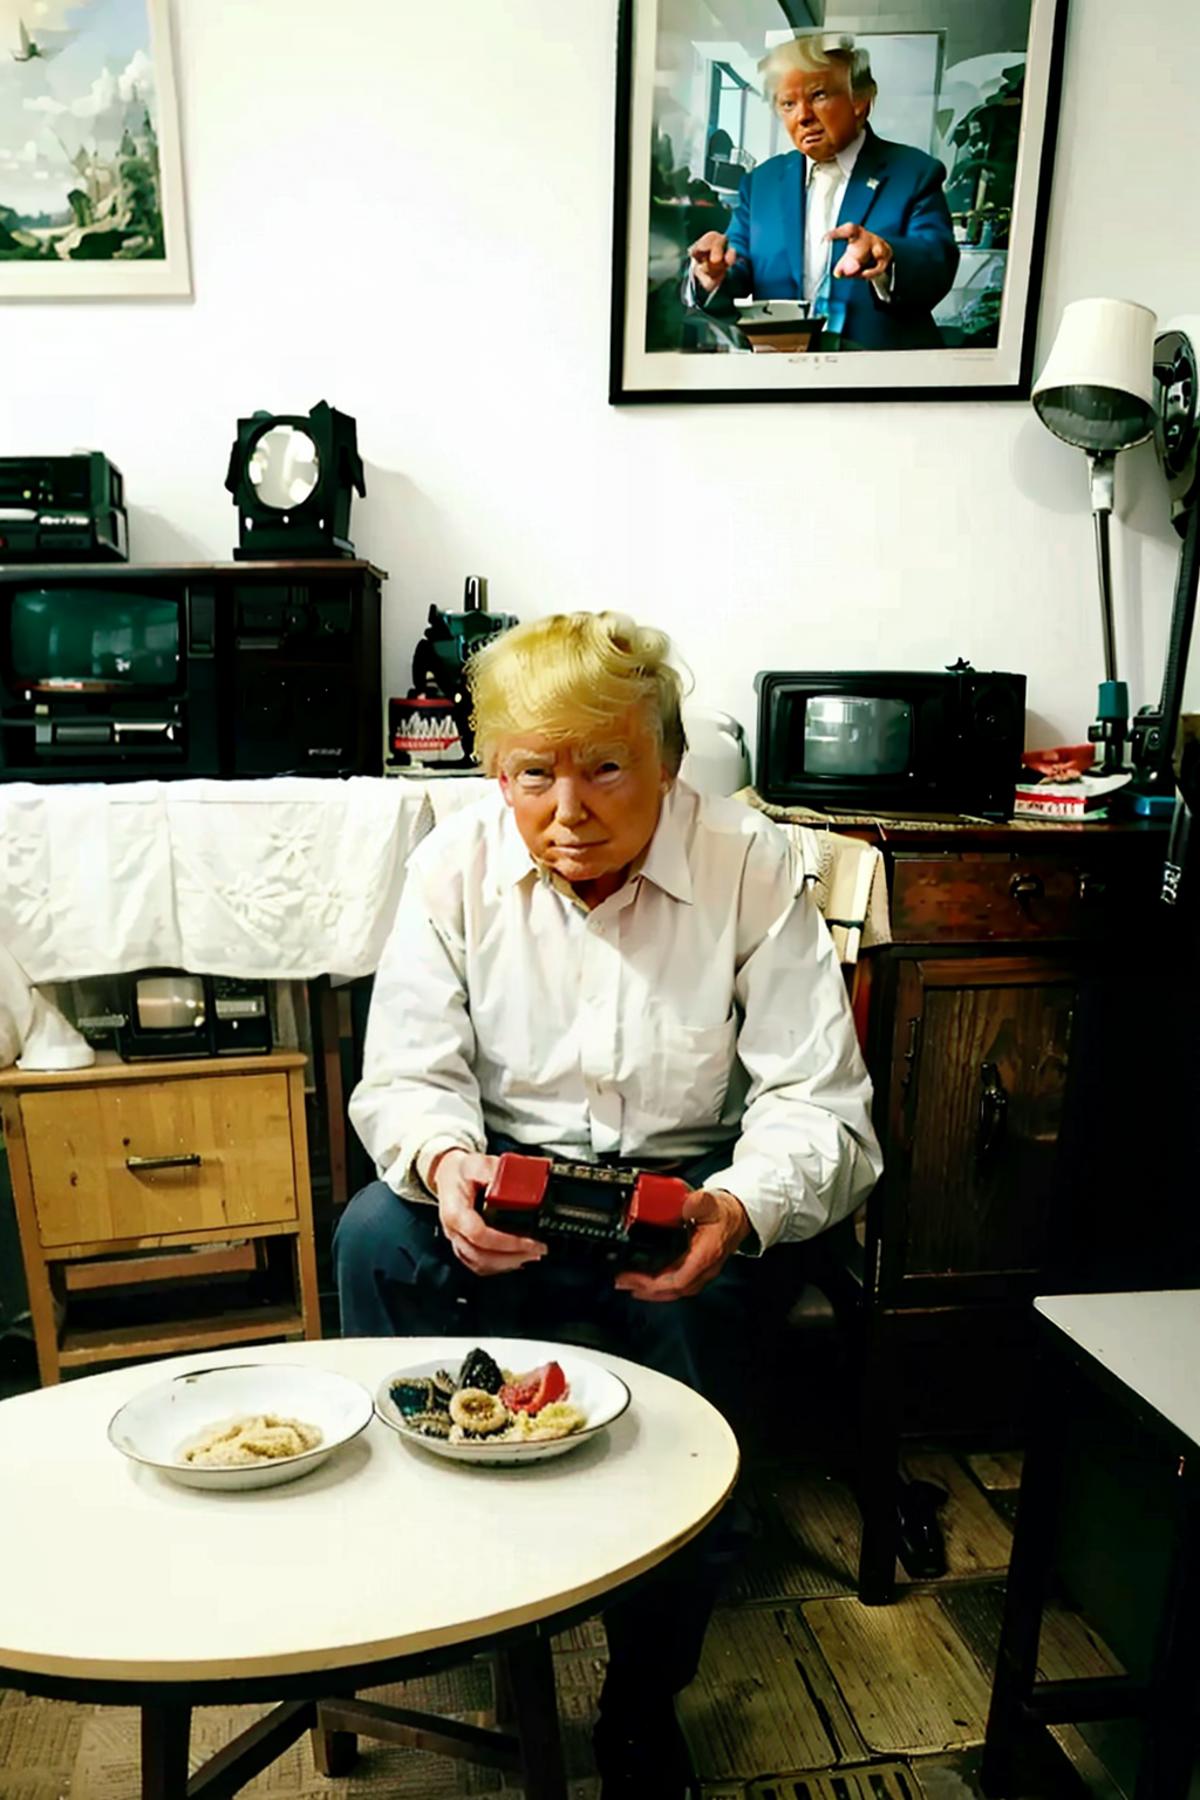 A man holding a box of Cracker Jacks while sitting in a room with various items.